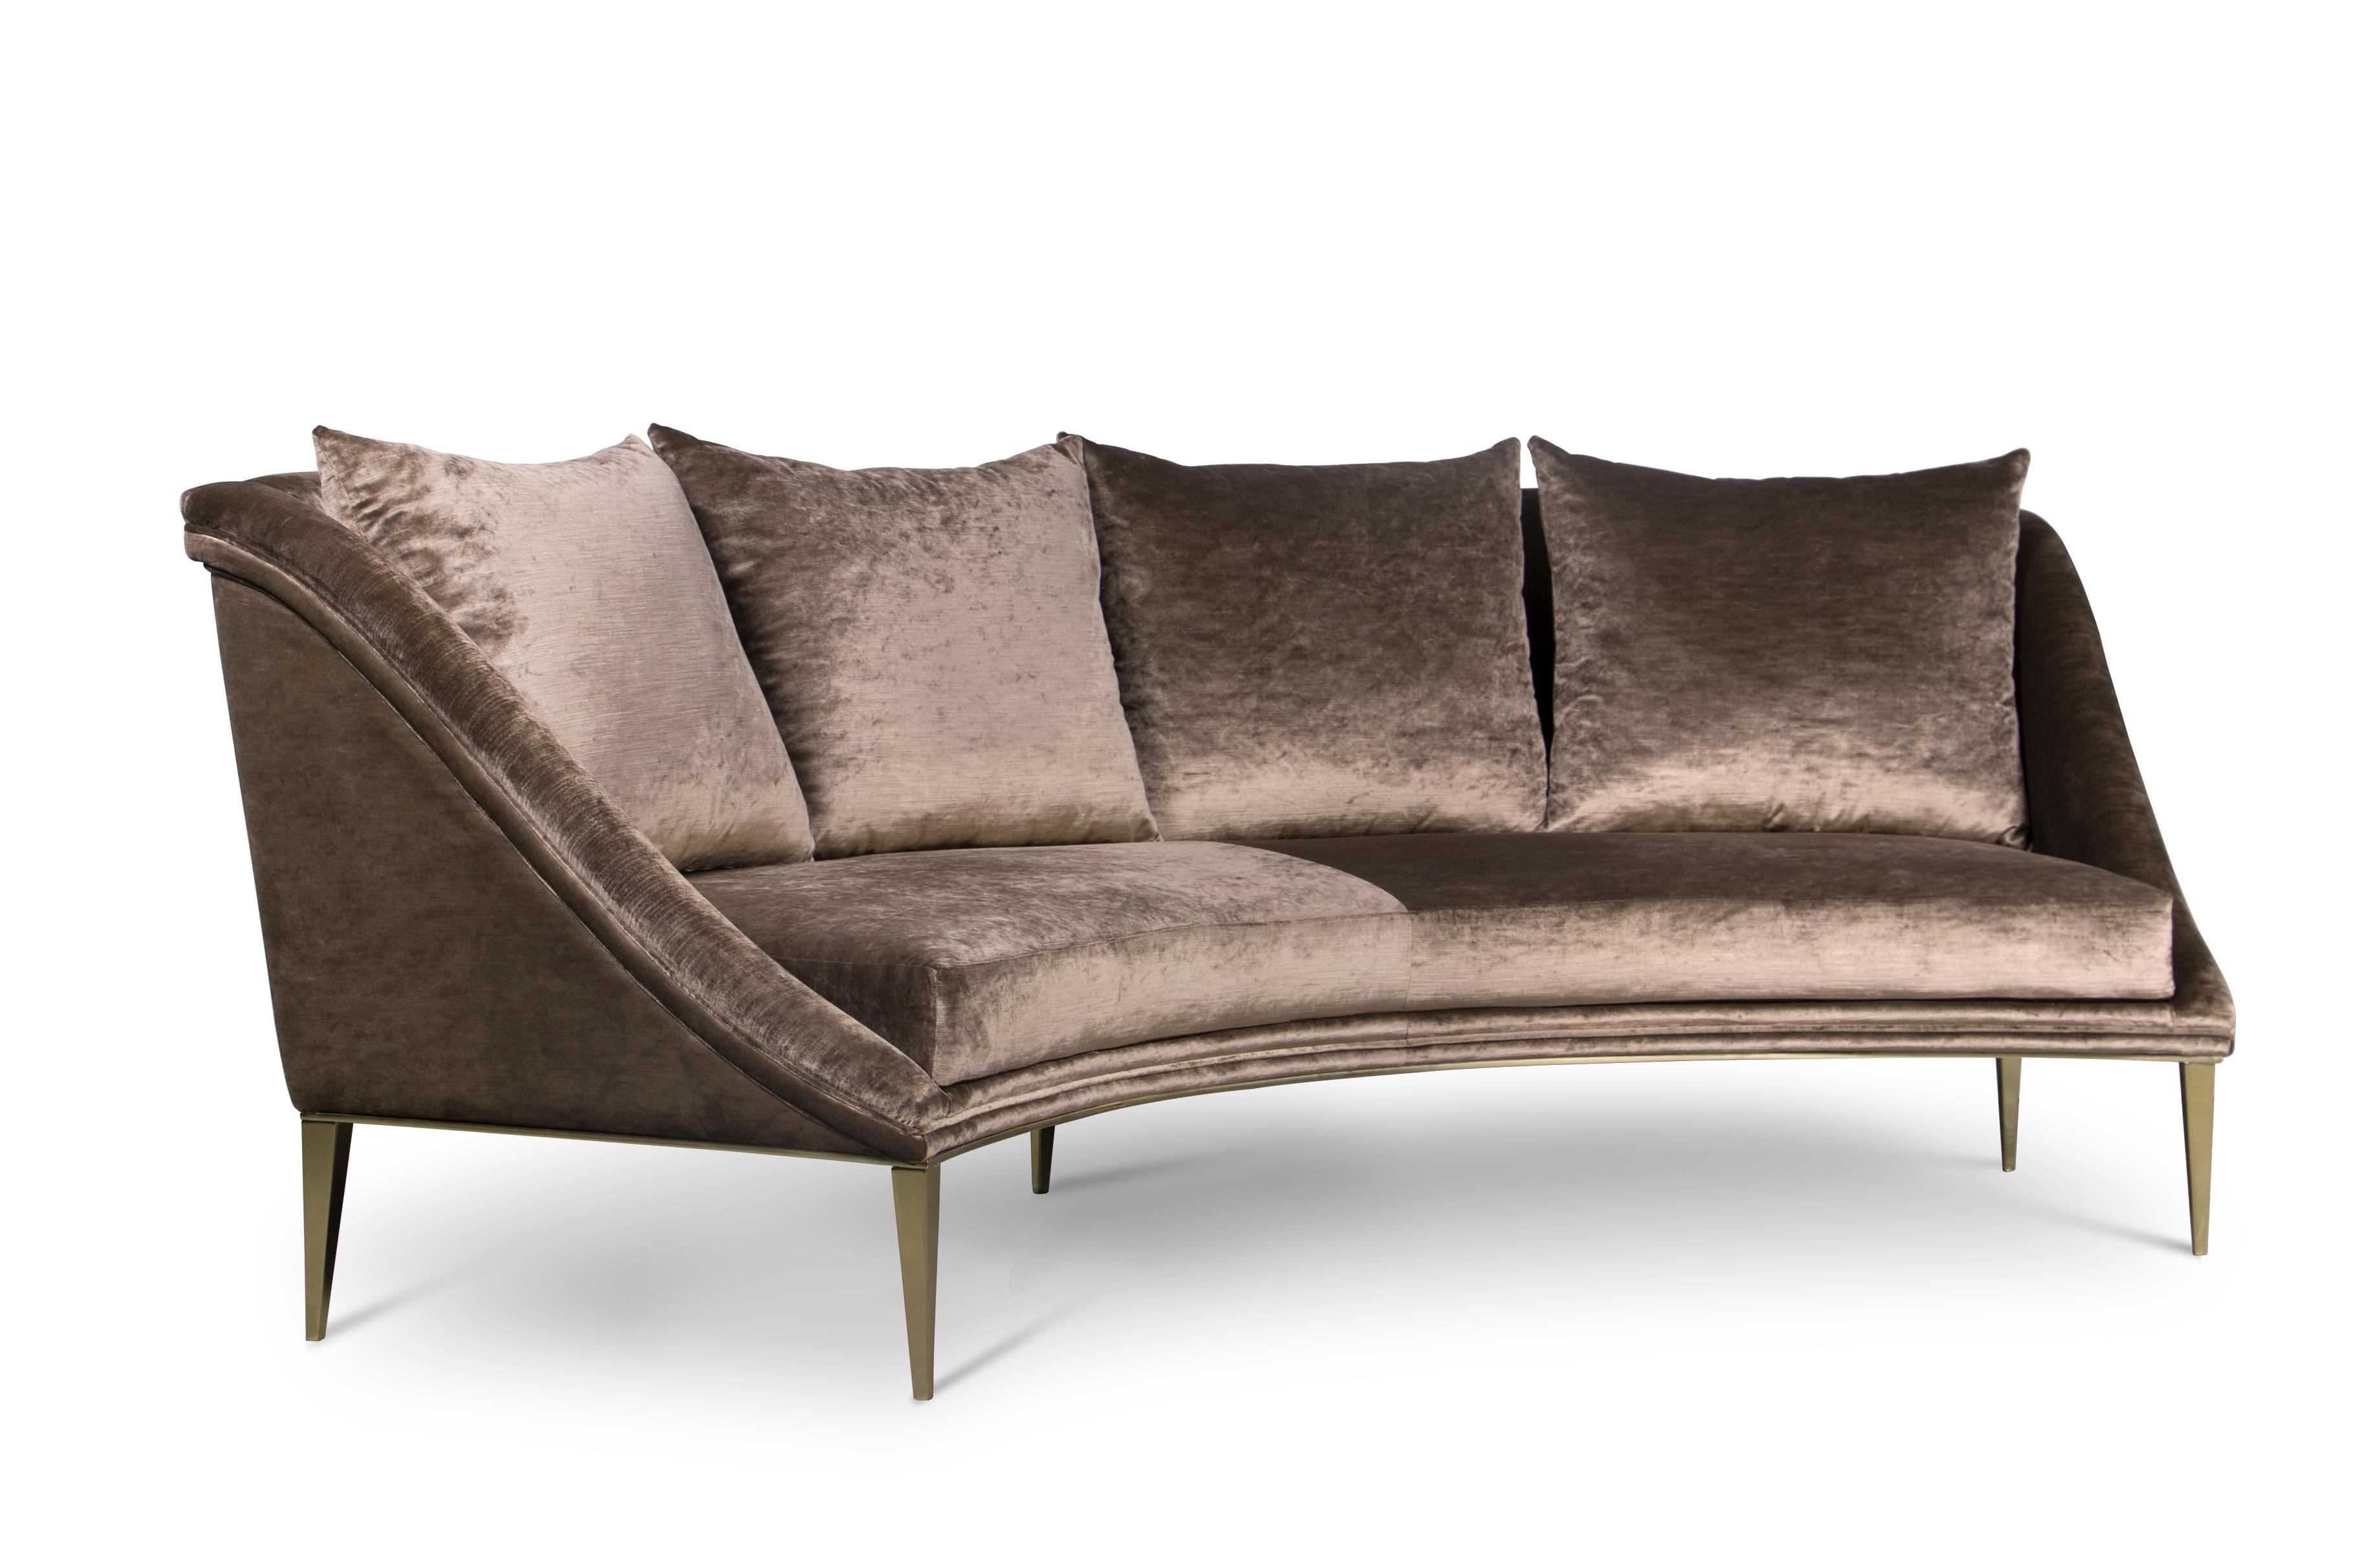 Designed to perform in a matter that indulges the eyes, the Geisha‘s curves grace a room with the extravagance and poise of a Kyoto Geisha. Her fully upholstered curved body rests on modern and sleek.

Options
Upholstery: Available in any fabric